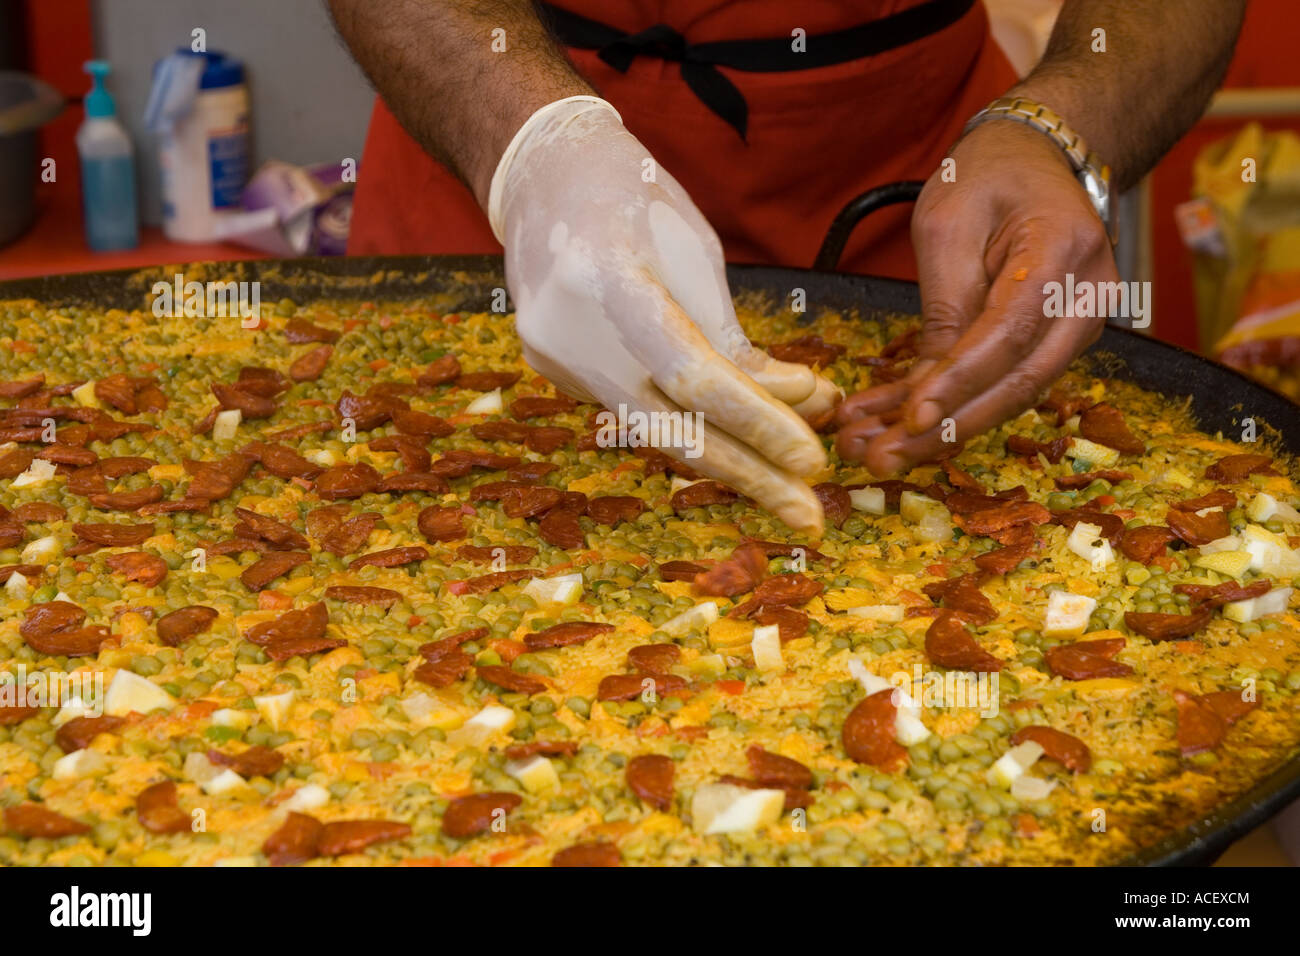 Spanish dish Paella being made at the Continental Market in Dundee, UK Stock Photo